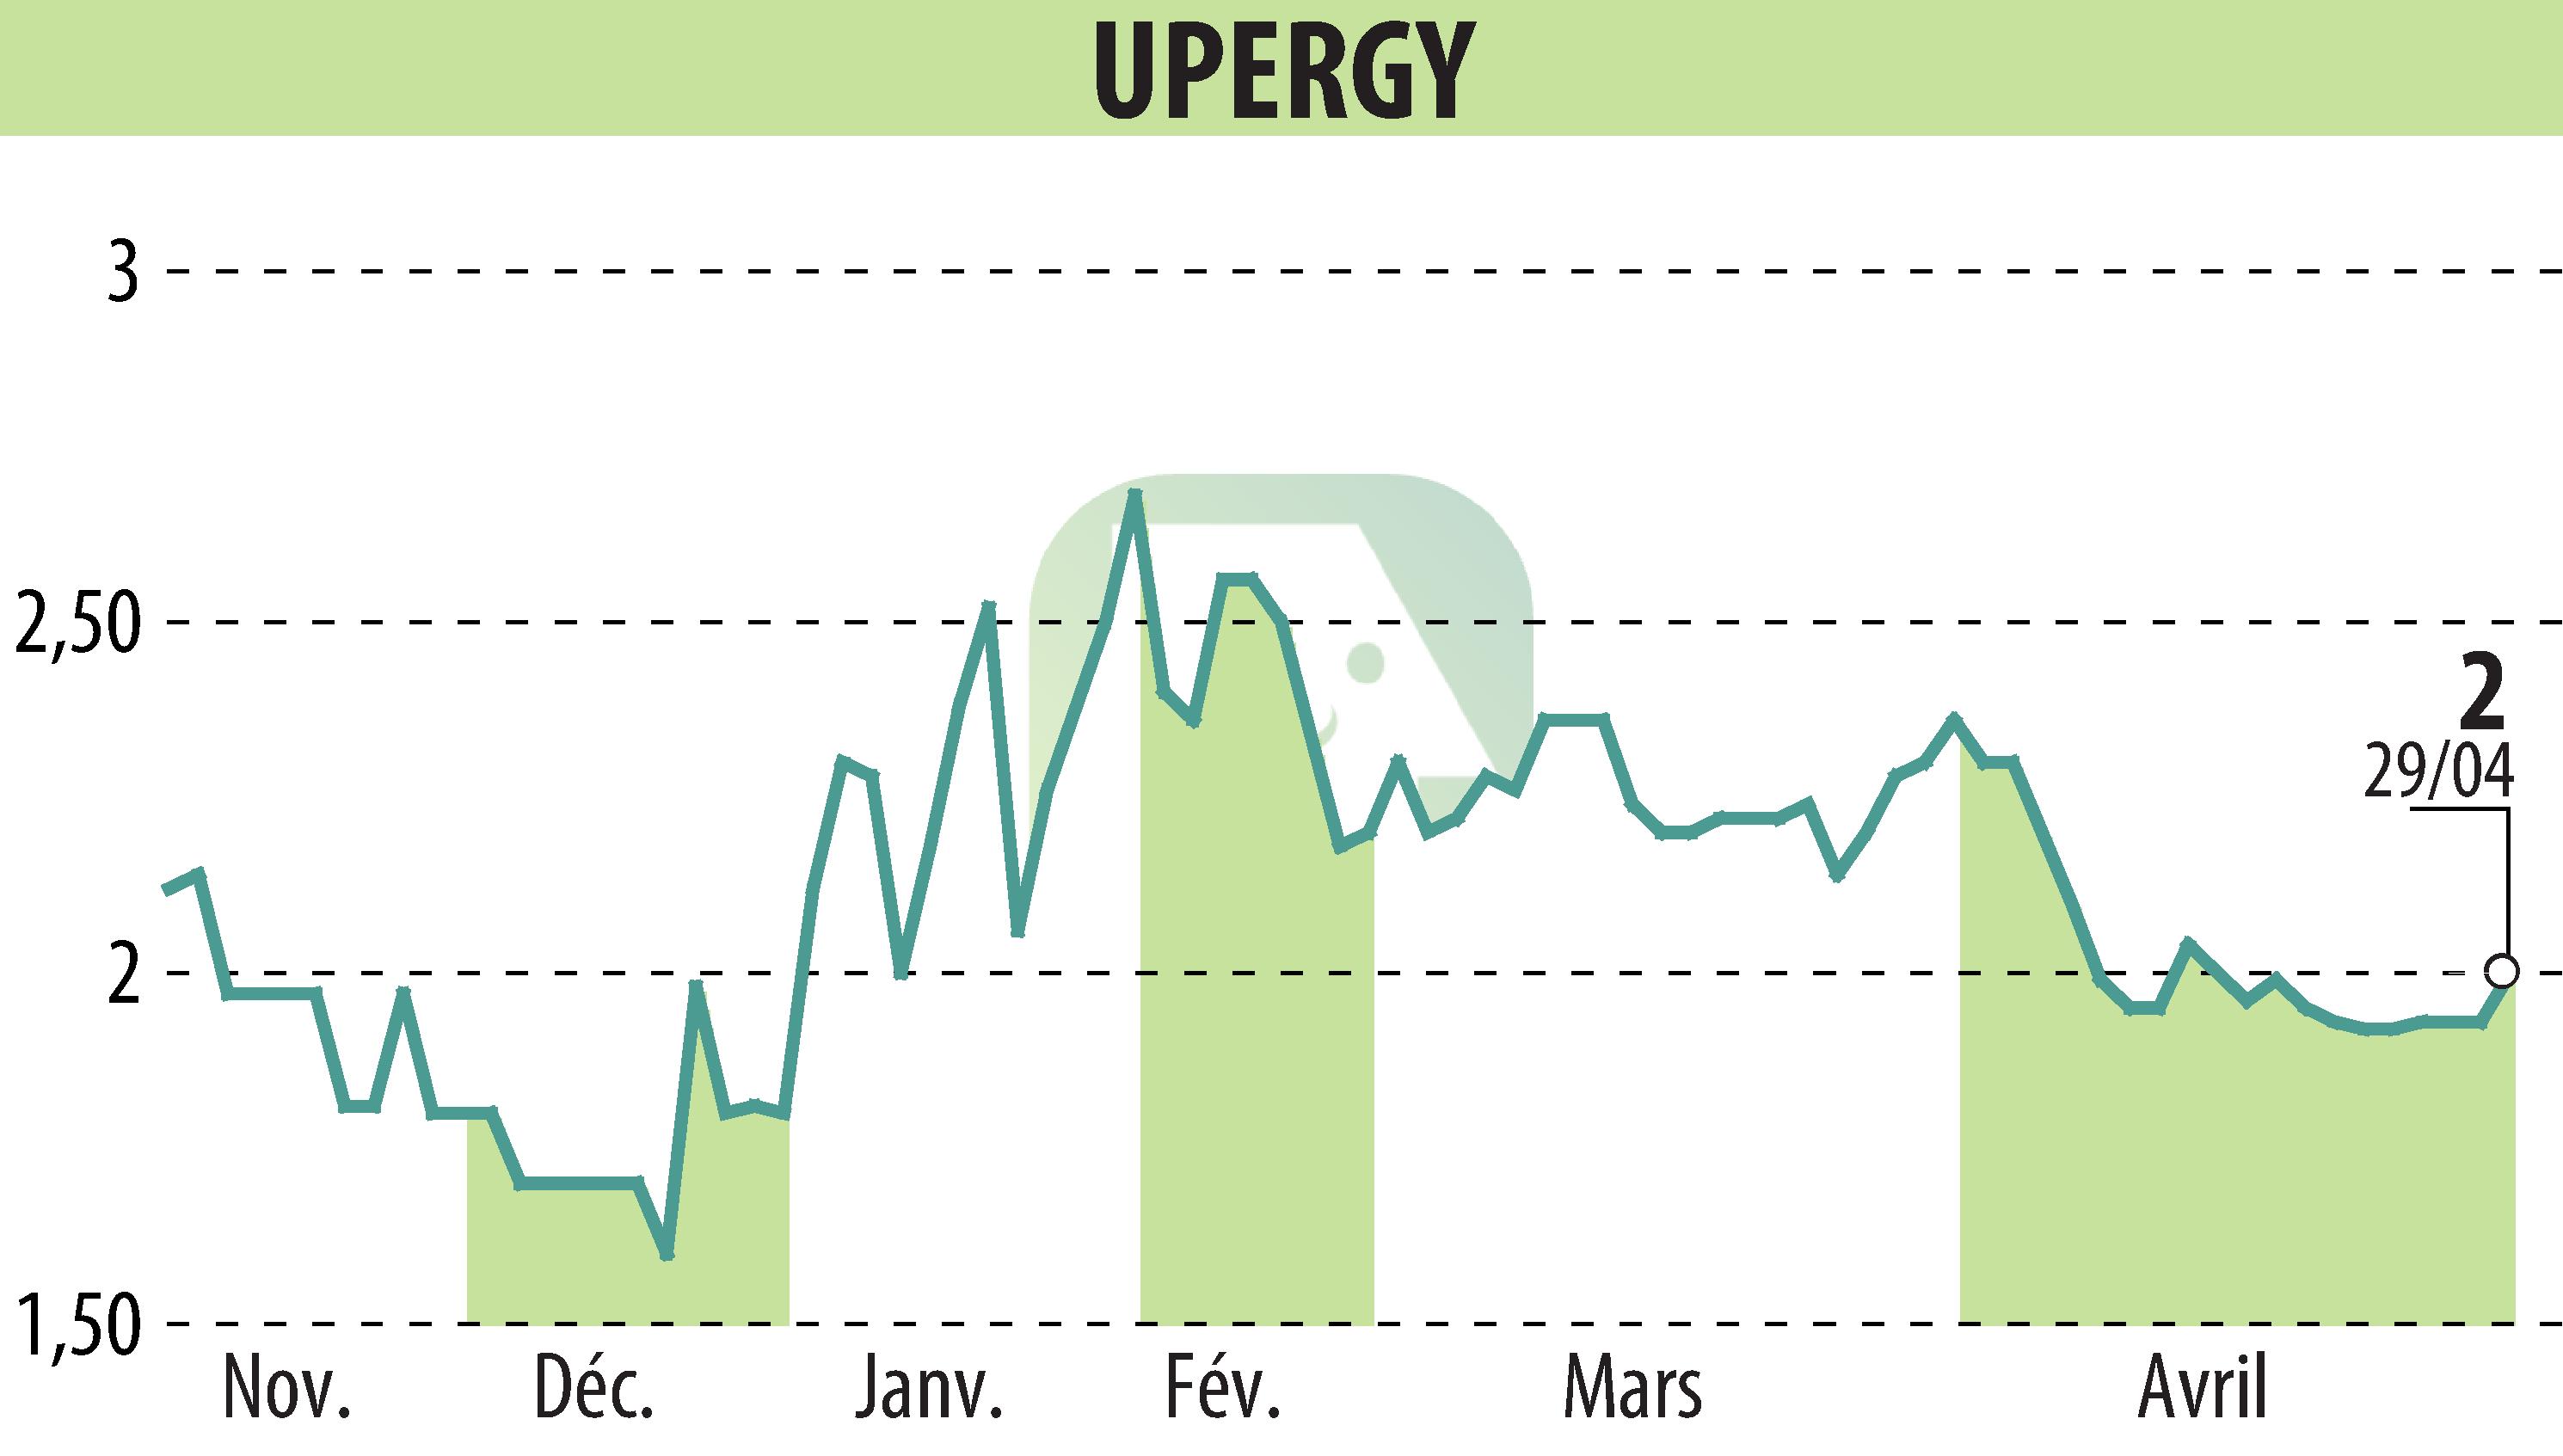 Stock price chart of UPERGY (EPA:ALUPG) showing fluctuations.